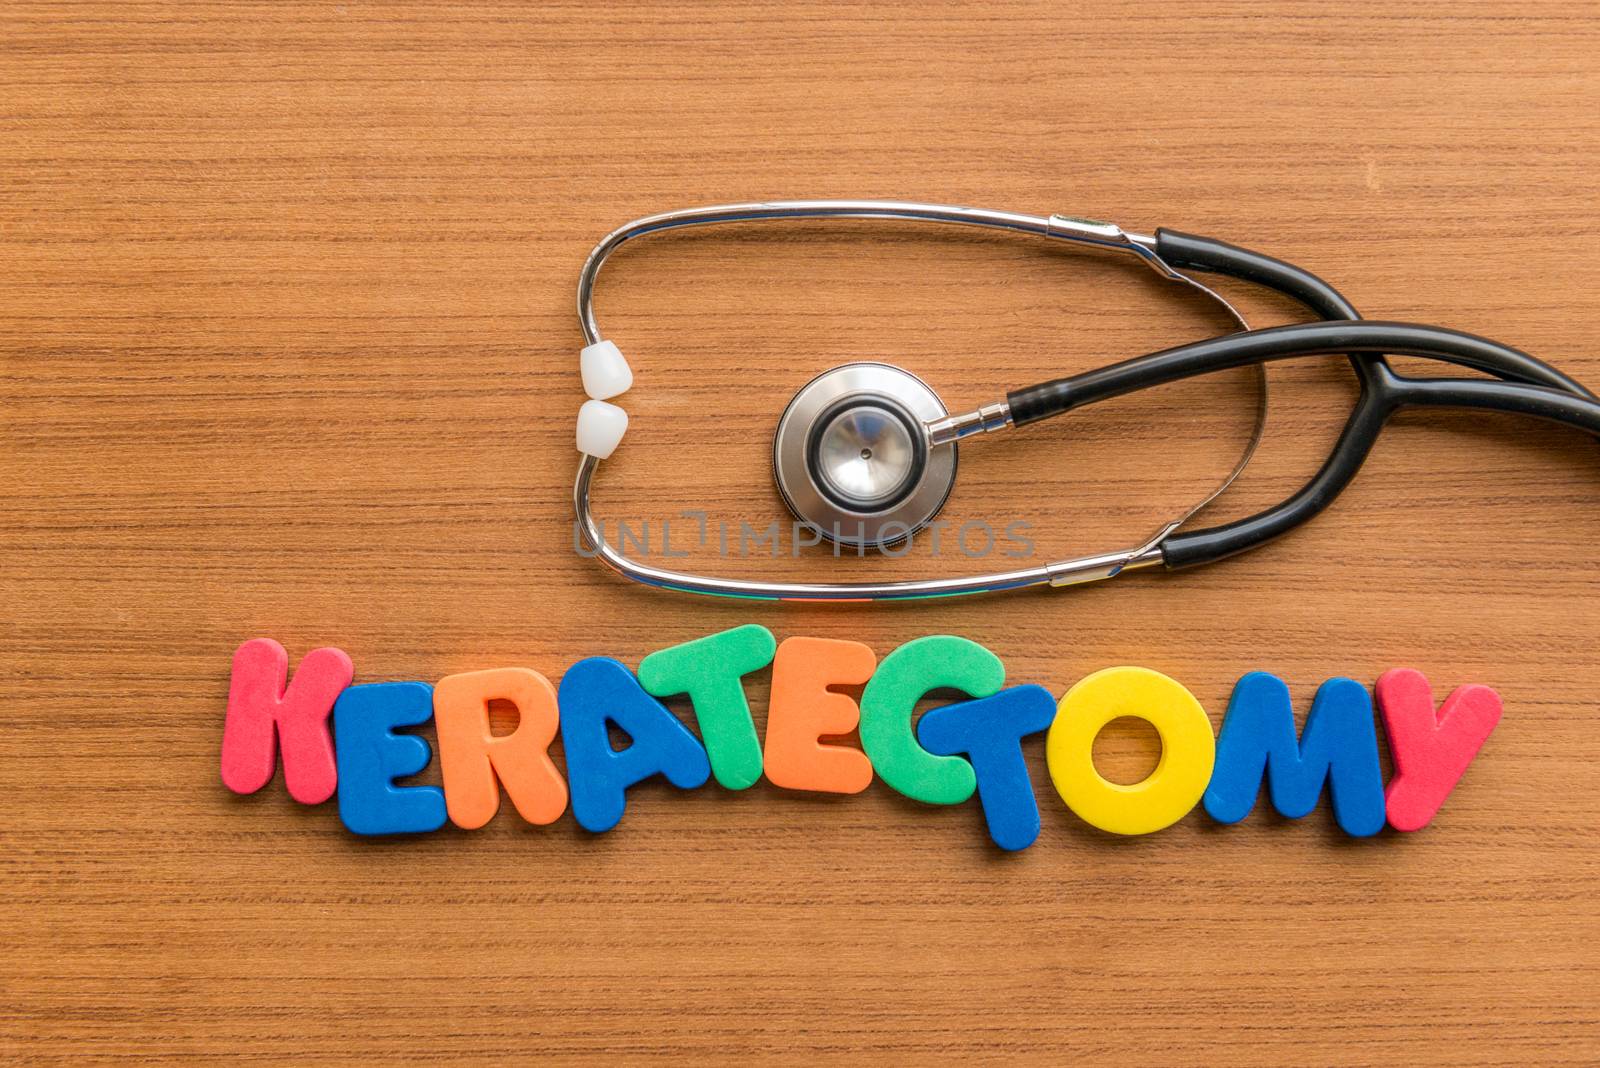 keratectomy colorful word with Stethoscope on wooden background